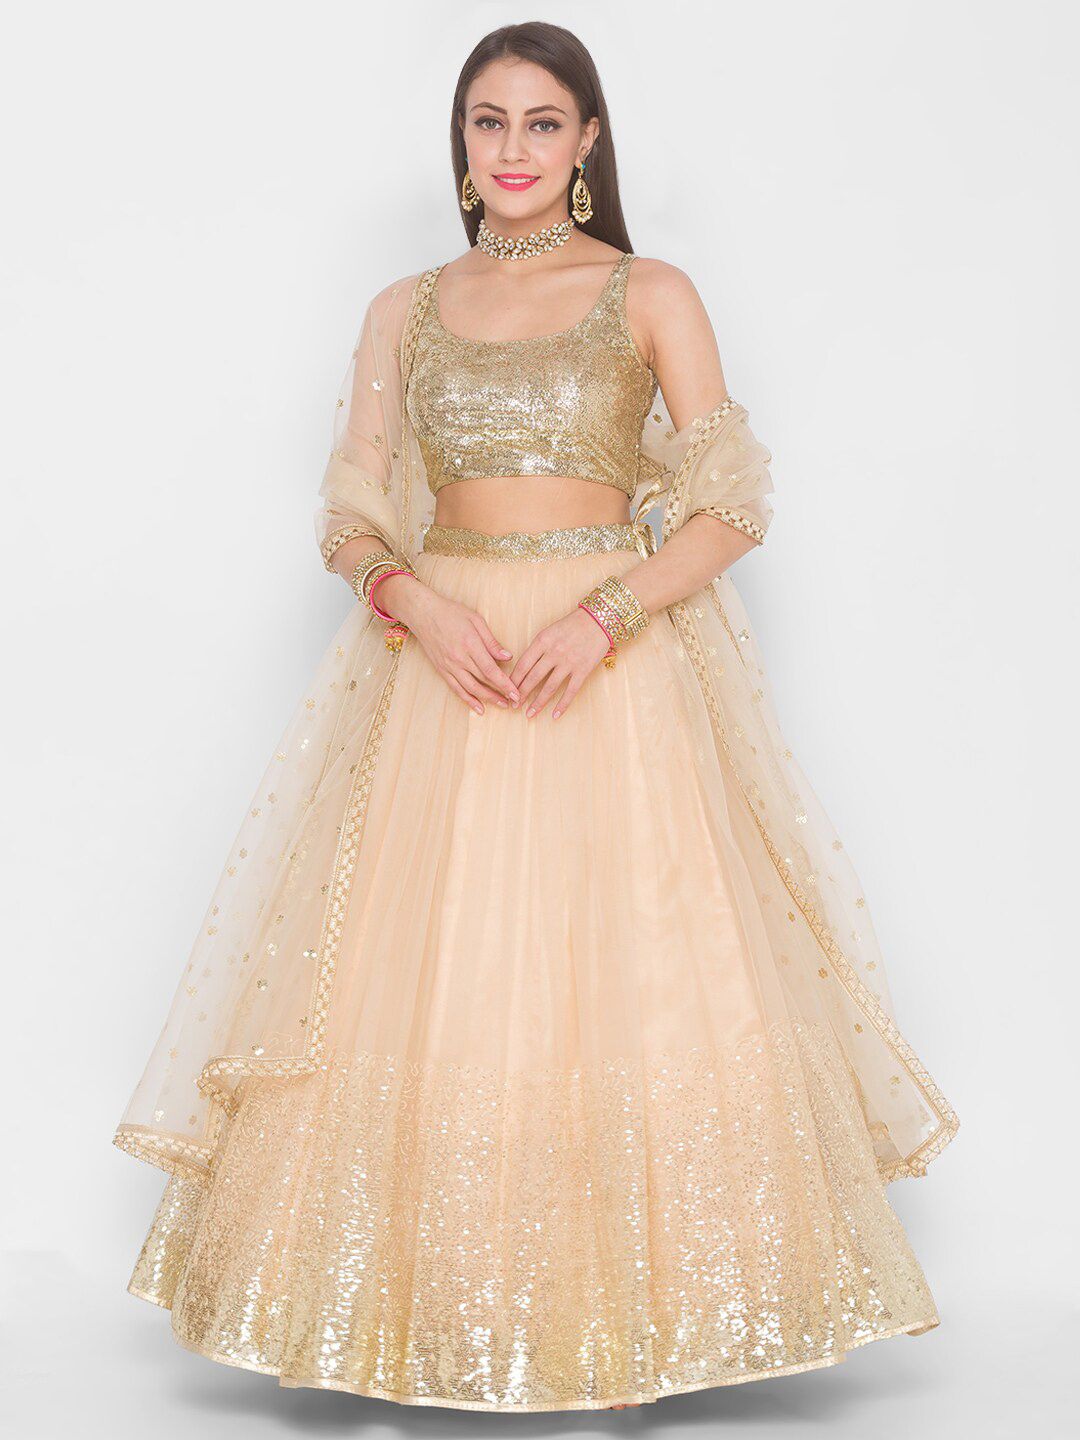 6Y COLLECTIVE Beige & Golden Embellished Sequinned Semi-Stitched Lehenga Set Price in India